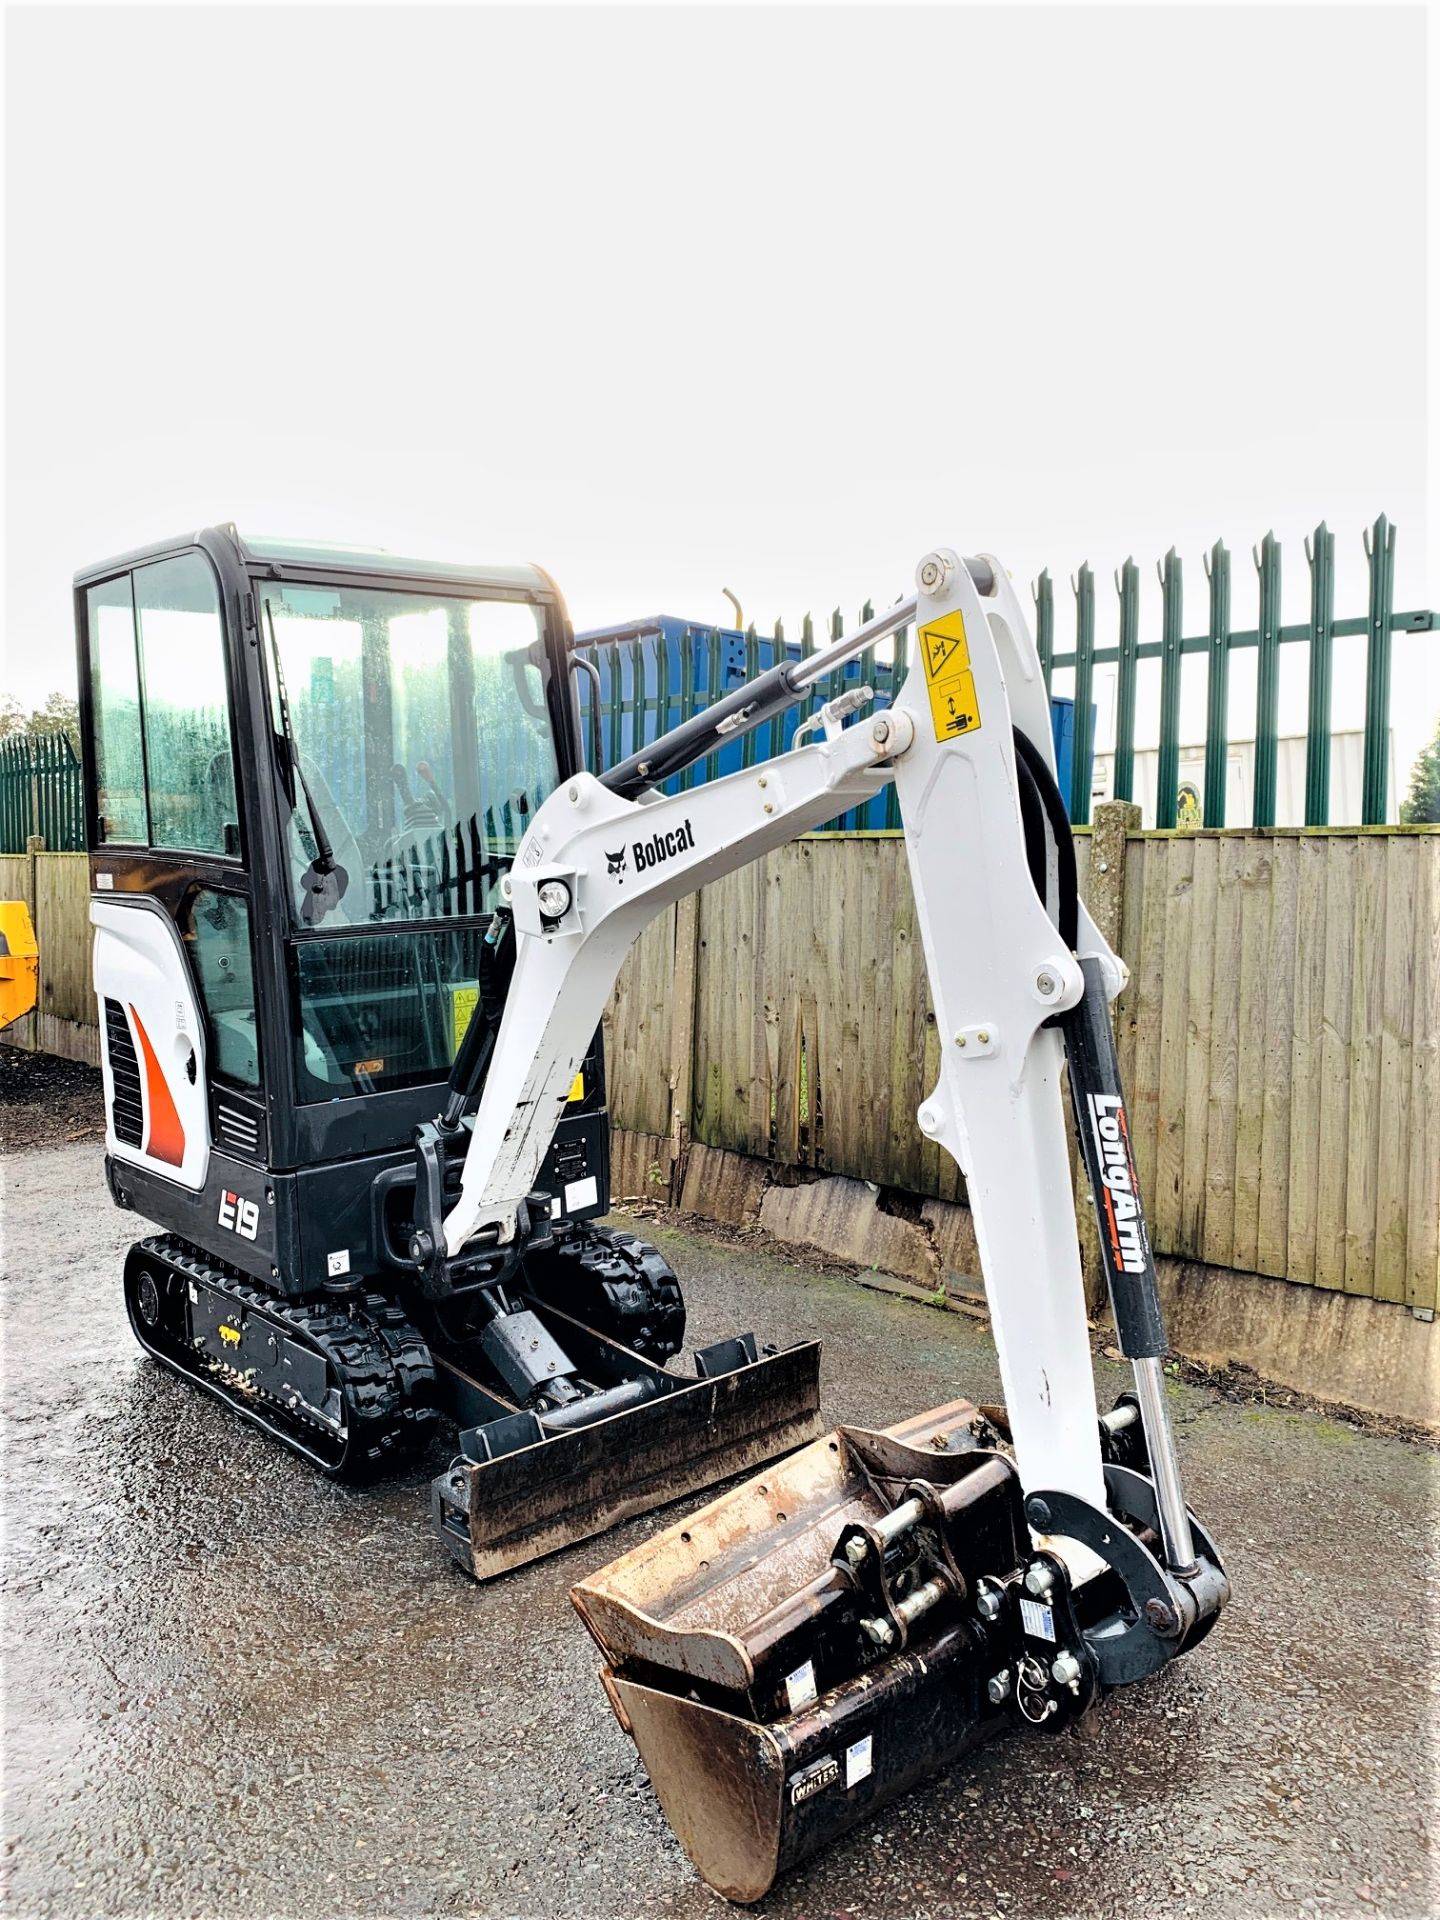 BOBCAT E19 RUBBER TRACKED CRAWLER DIGGER / EXCAVATOR, YEAR 2019, 3 X BUCKETS, 2 SPEED TRACKING - Image 5 of 10